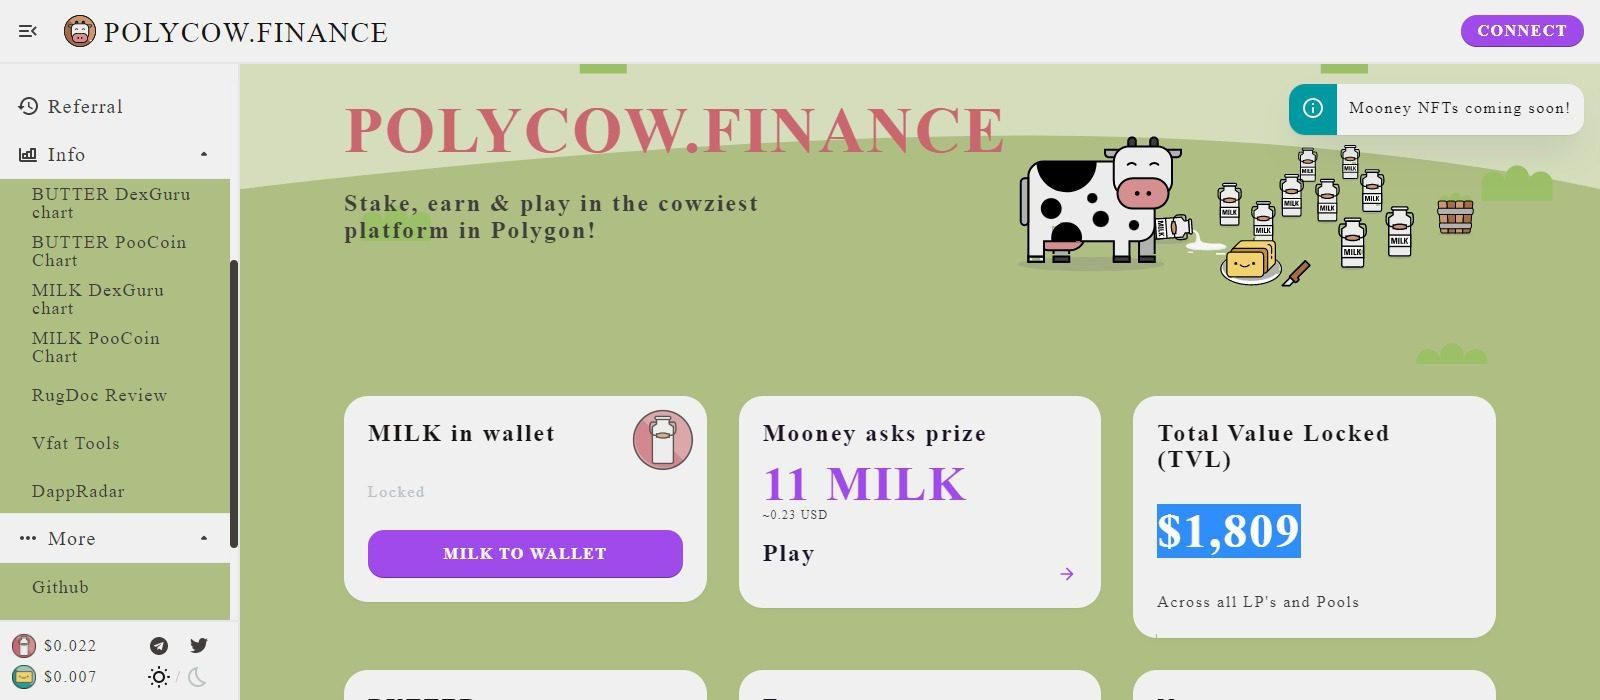 Polycow Finance Defi Coins Review - A Detailed Review About Trapeza Protocol